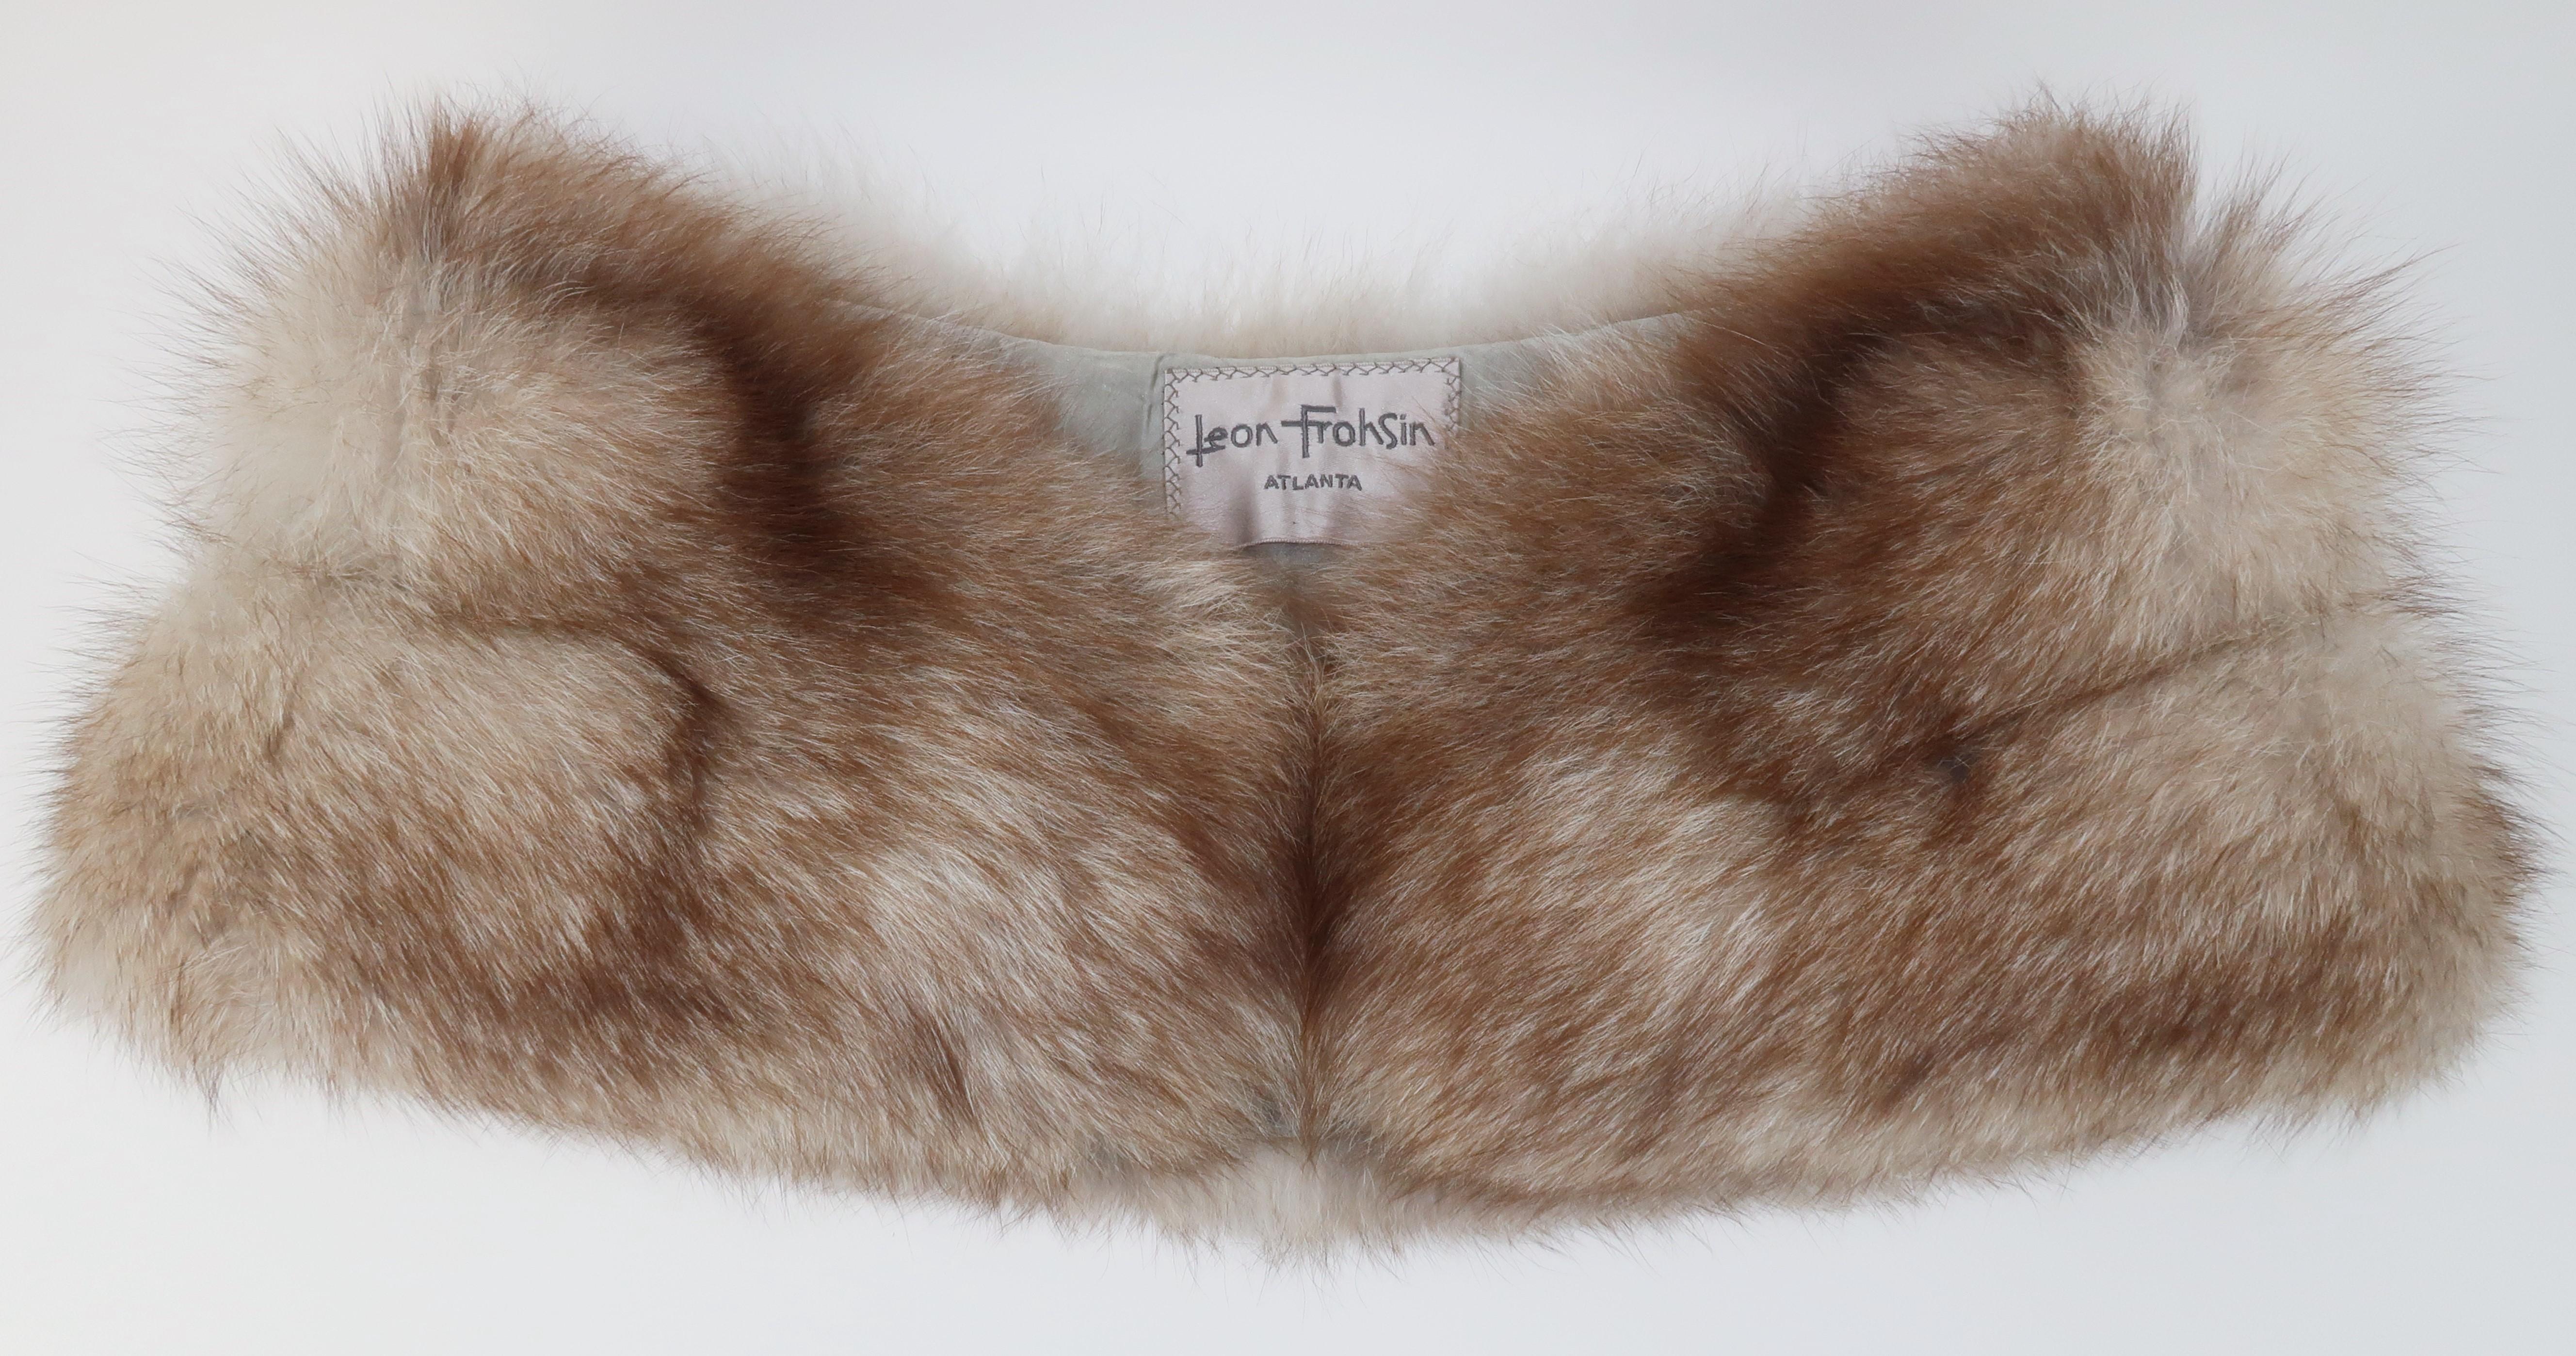 1950's fox fur stole with the versatile shape enabling it to be worn as a collar, shoulder warmer or a classic wrap.  The lush fur displays shades of grayish white and light brown with hints of red.  The backside is lined in a neutral grayish taupe